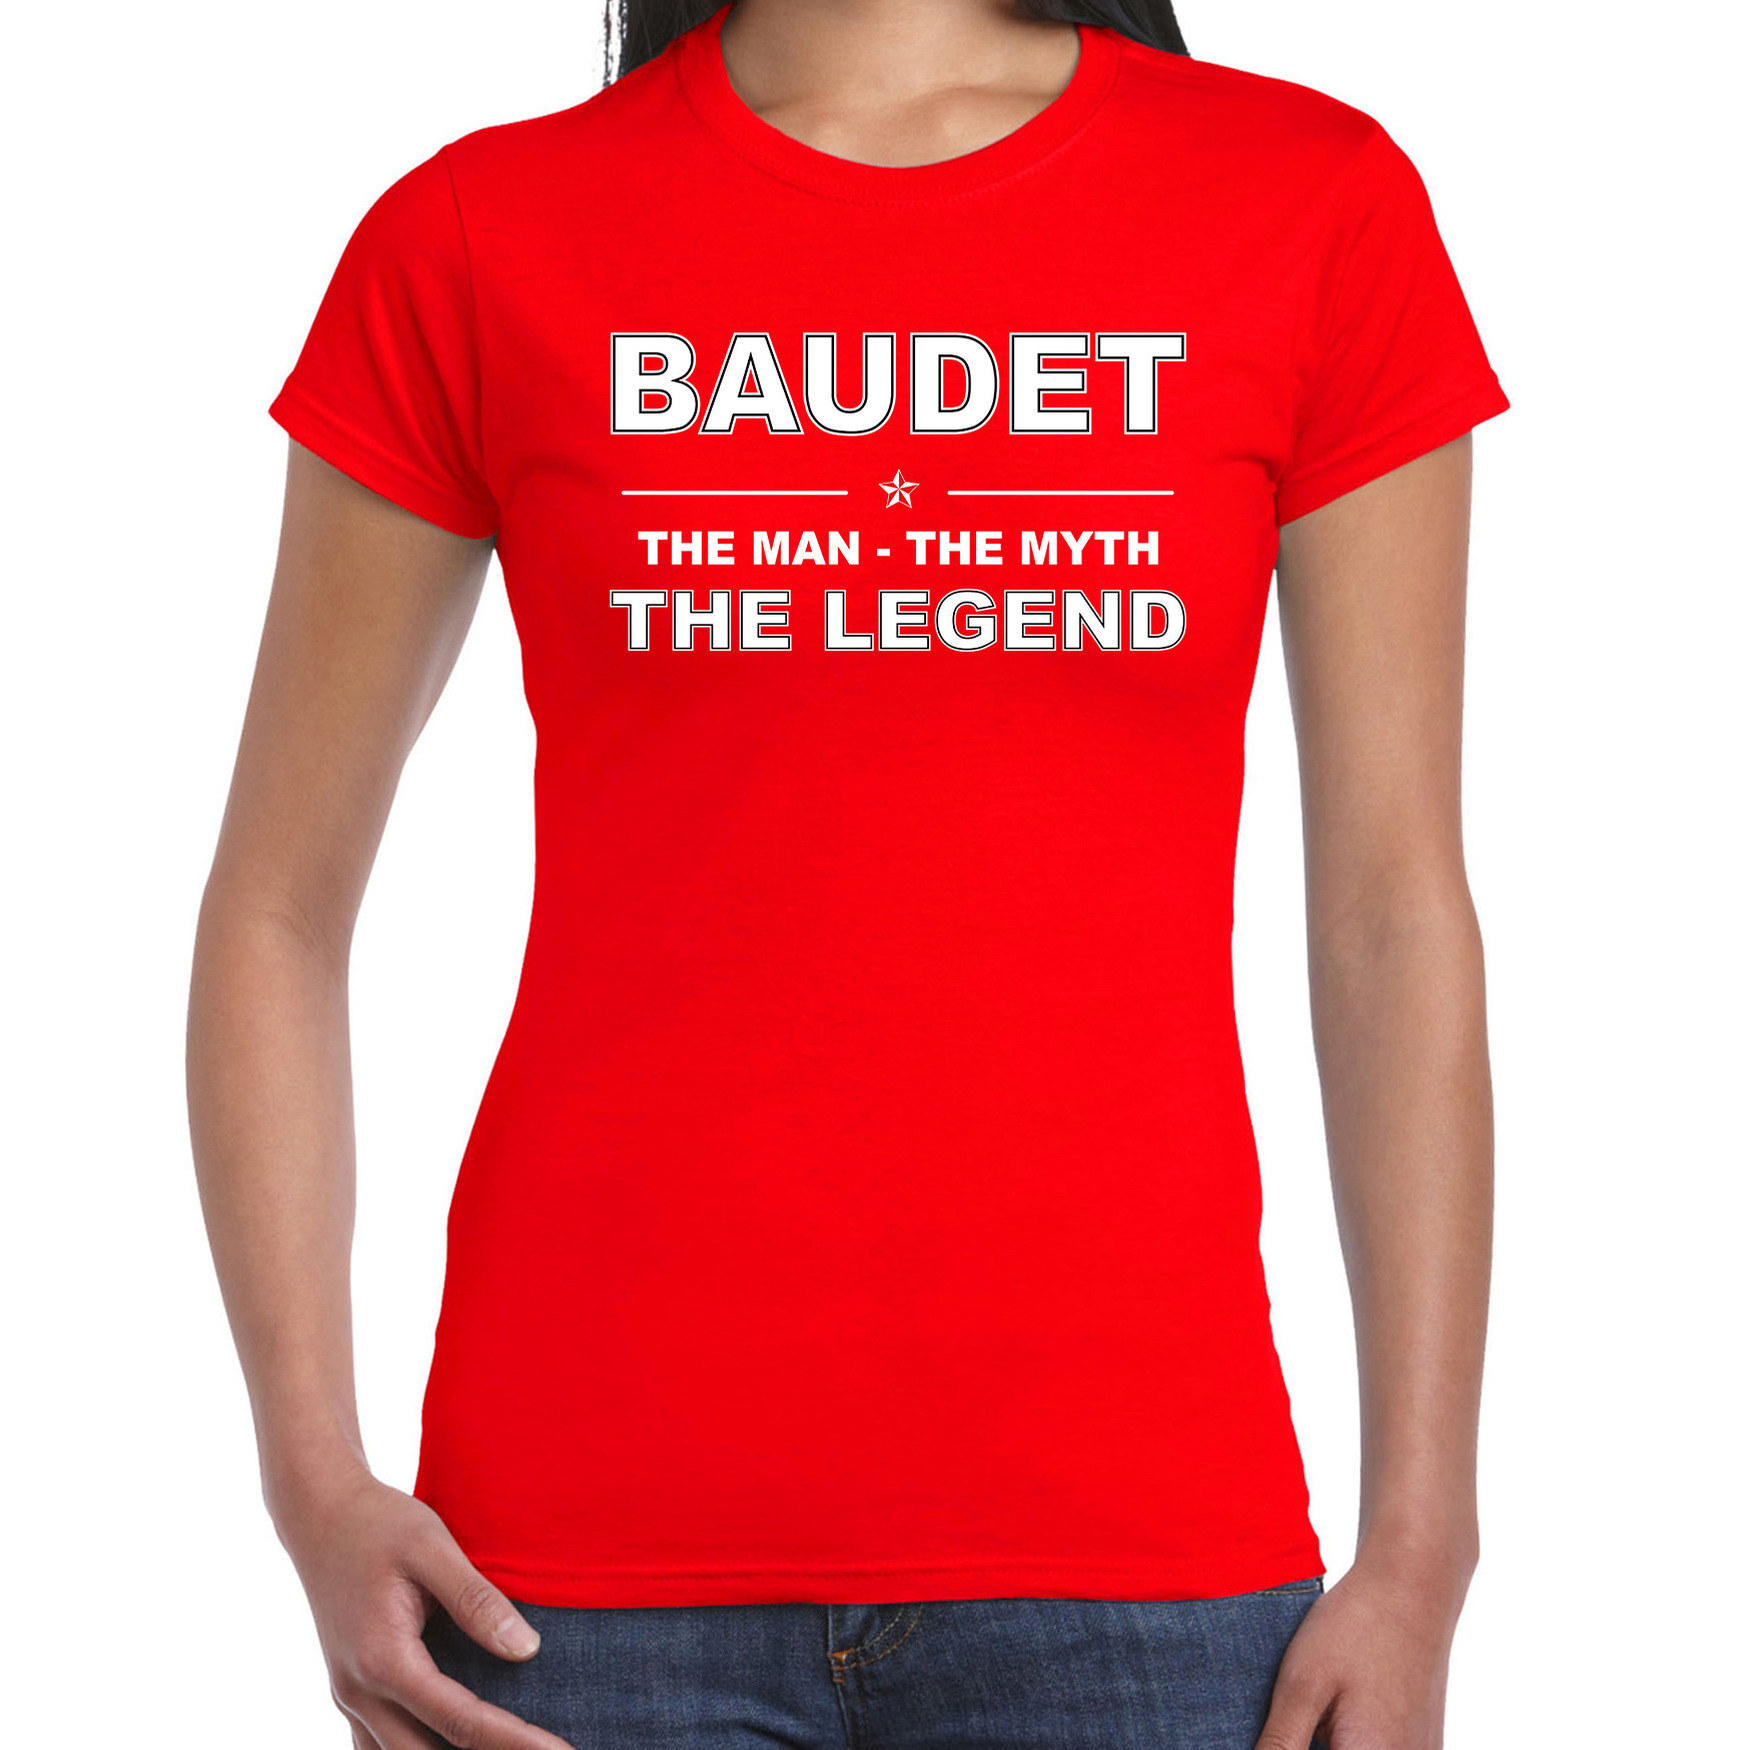 Baudet naam t-shirt the man-the myth-the legend rood voor dames